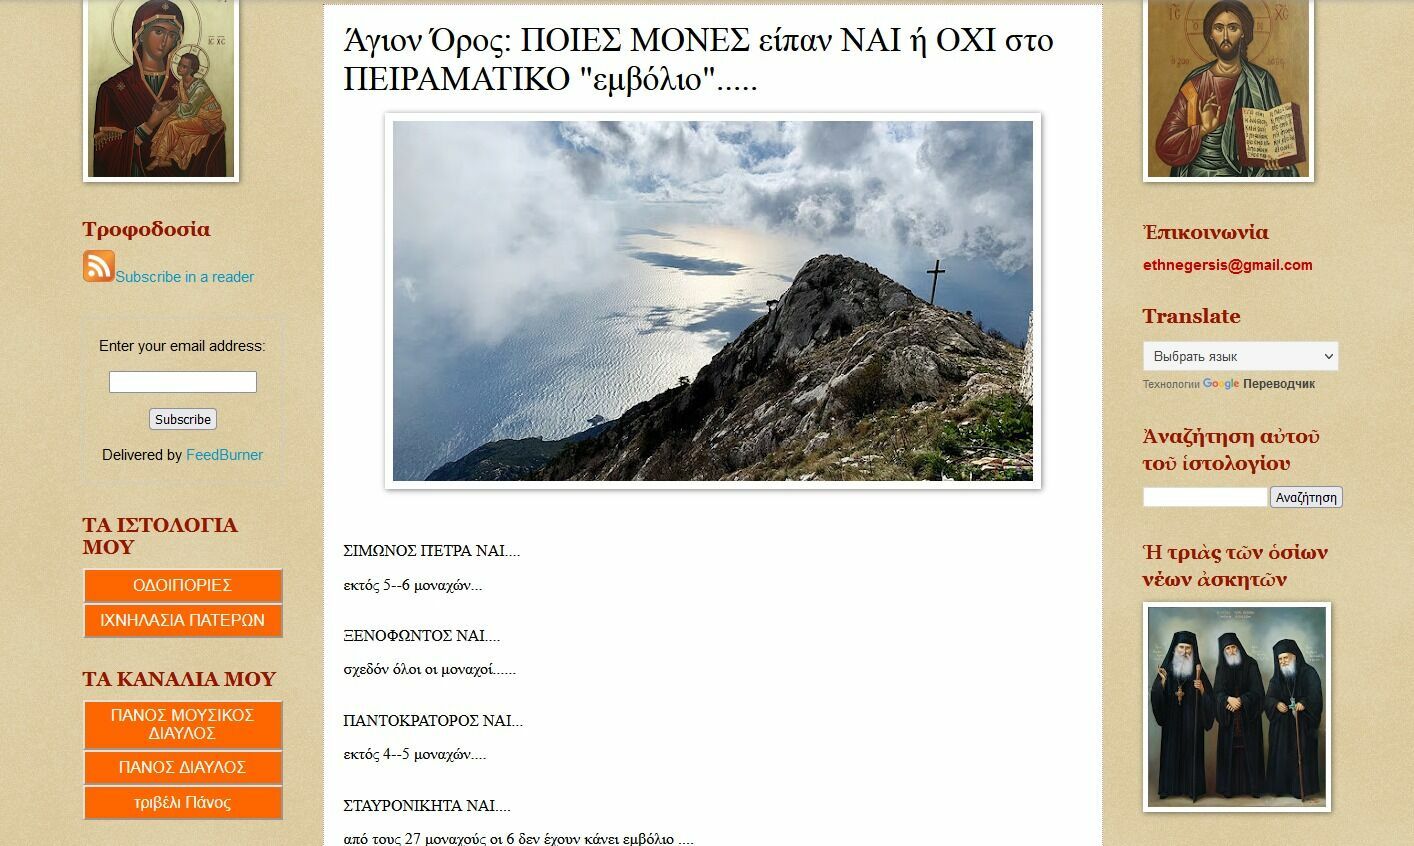 The Greek website ethnegersis.blogspot.com (ΕΘΝΕΓΕΡΣΙΣ - "National Uprising") has published accurate statistics on how many monks and in which specific monasteries of Mount Athos were vaccinated. 